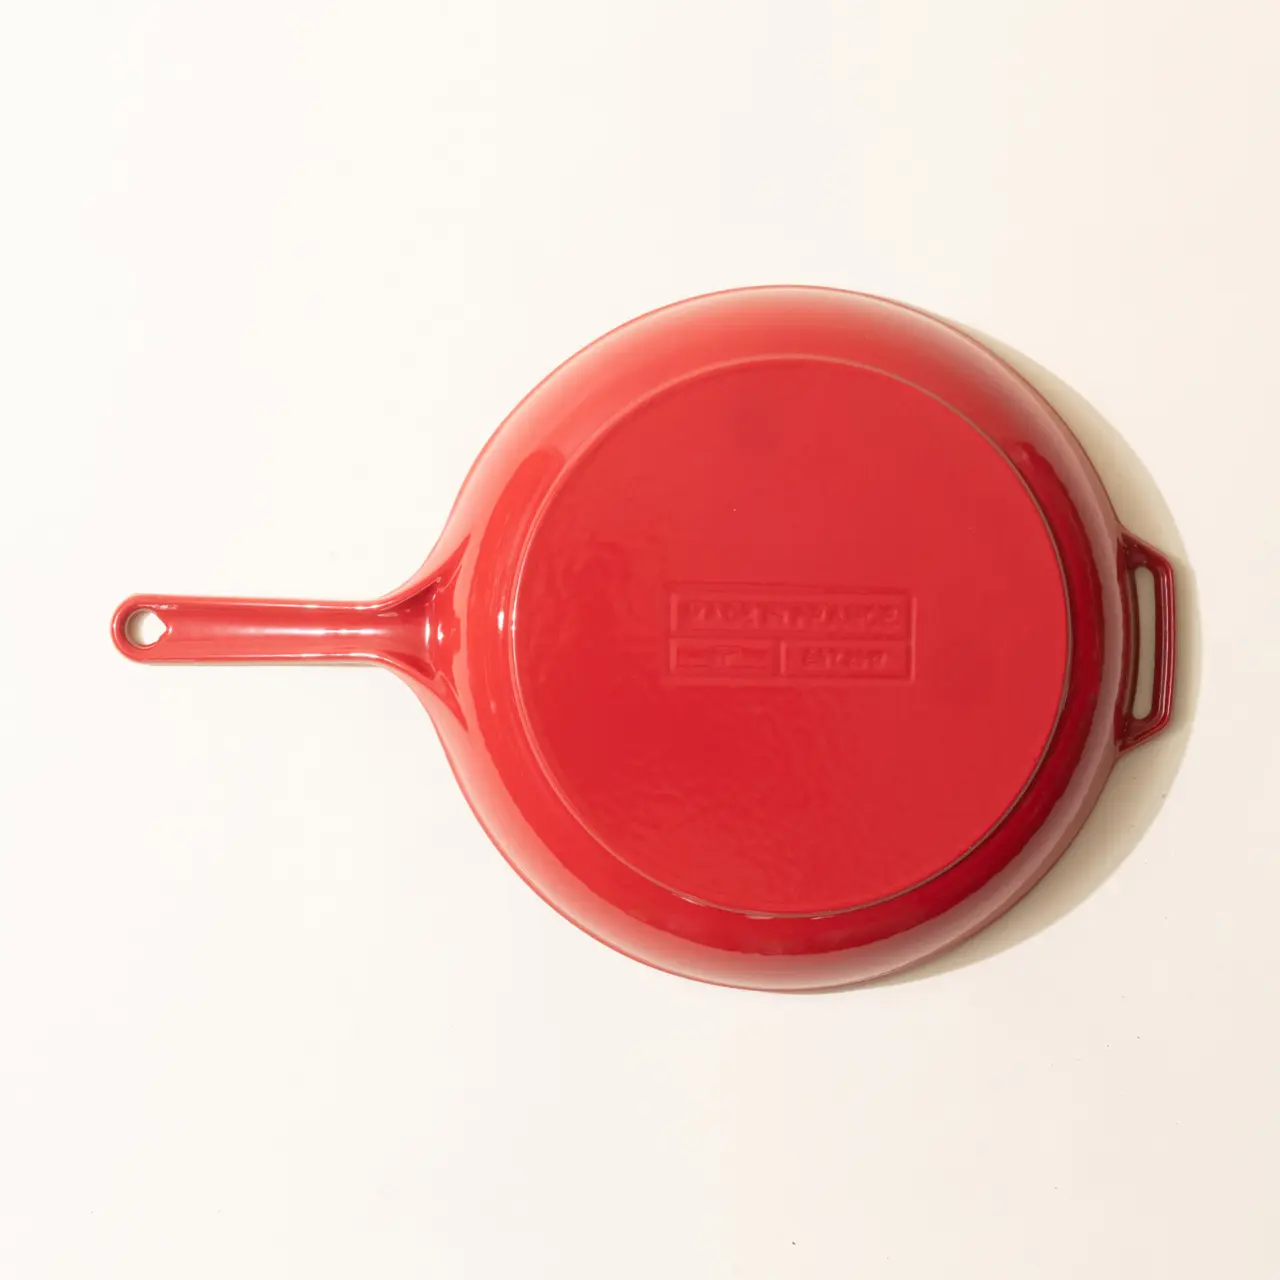 A red enameled cast iron skillet is positioned on a white surface.